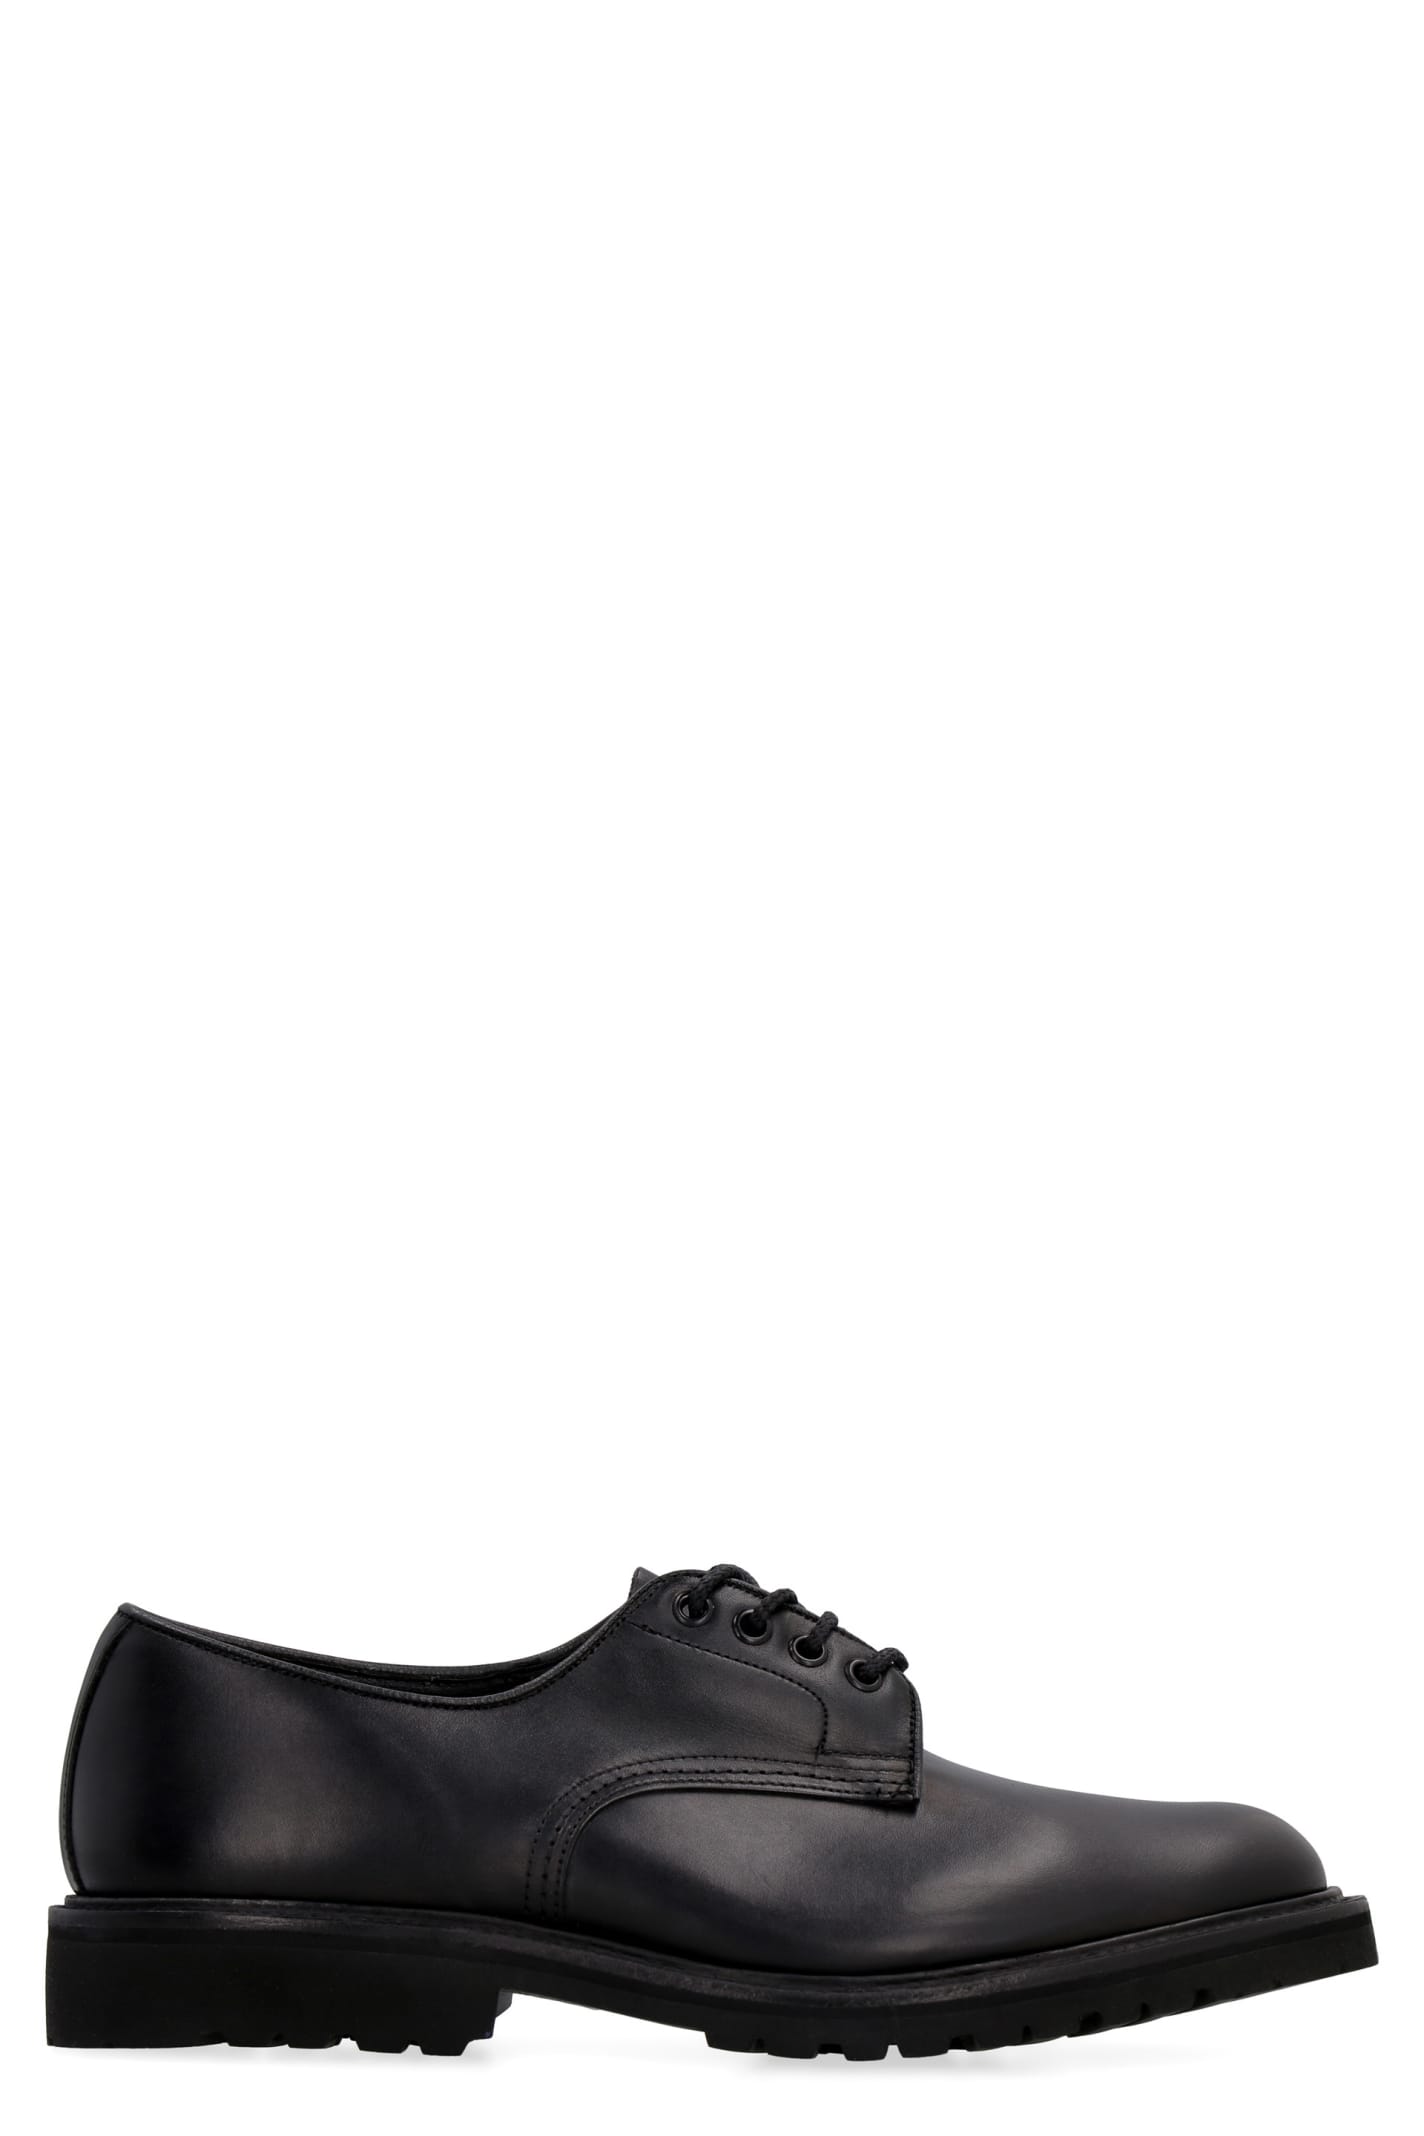 Trickers Daniel Leather Lace-up Derby Shoes